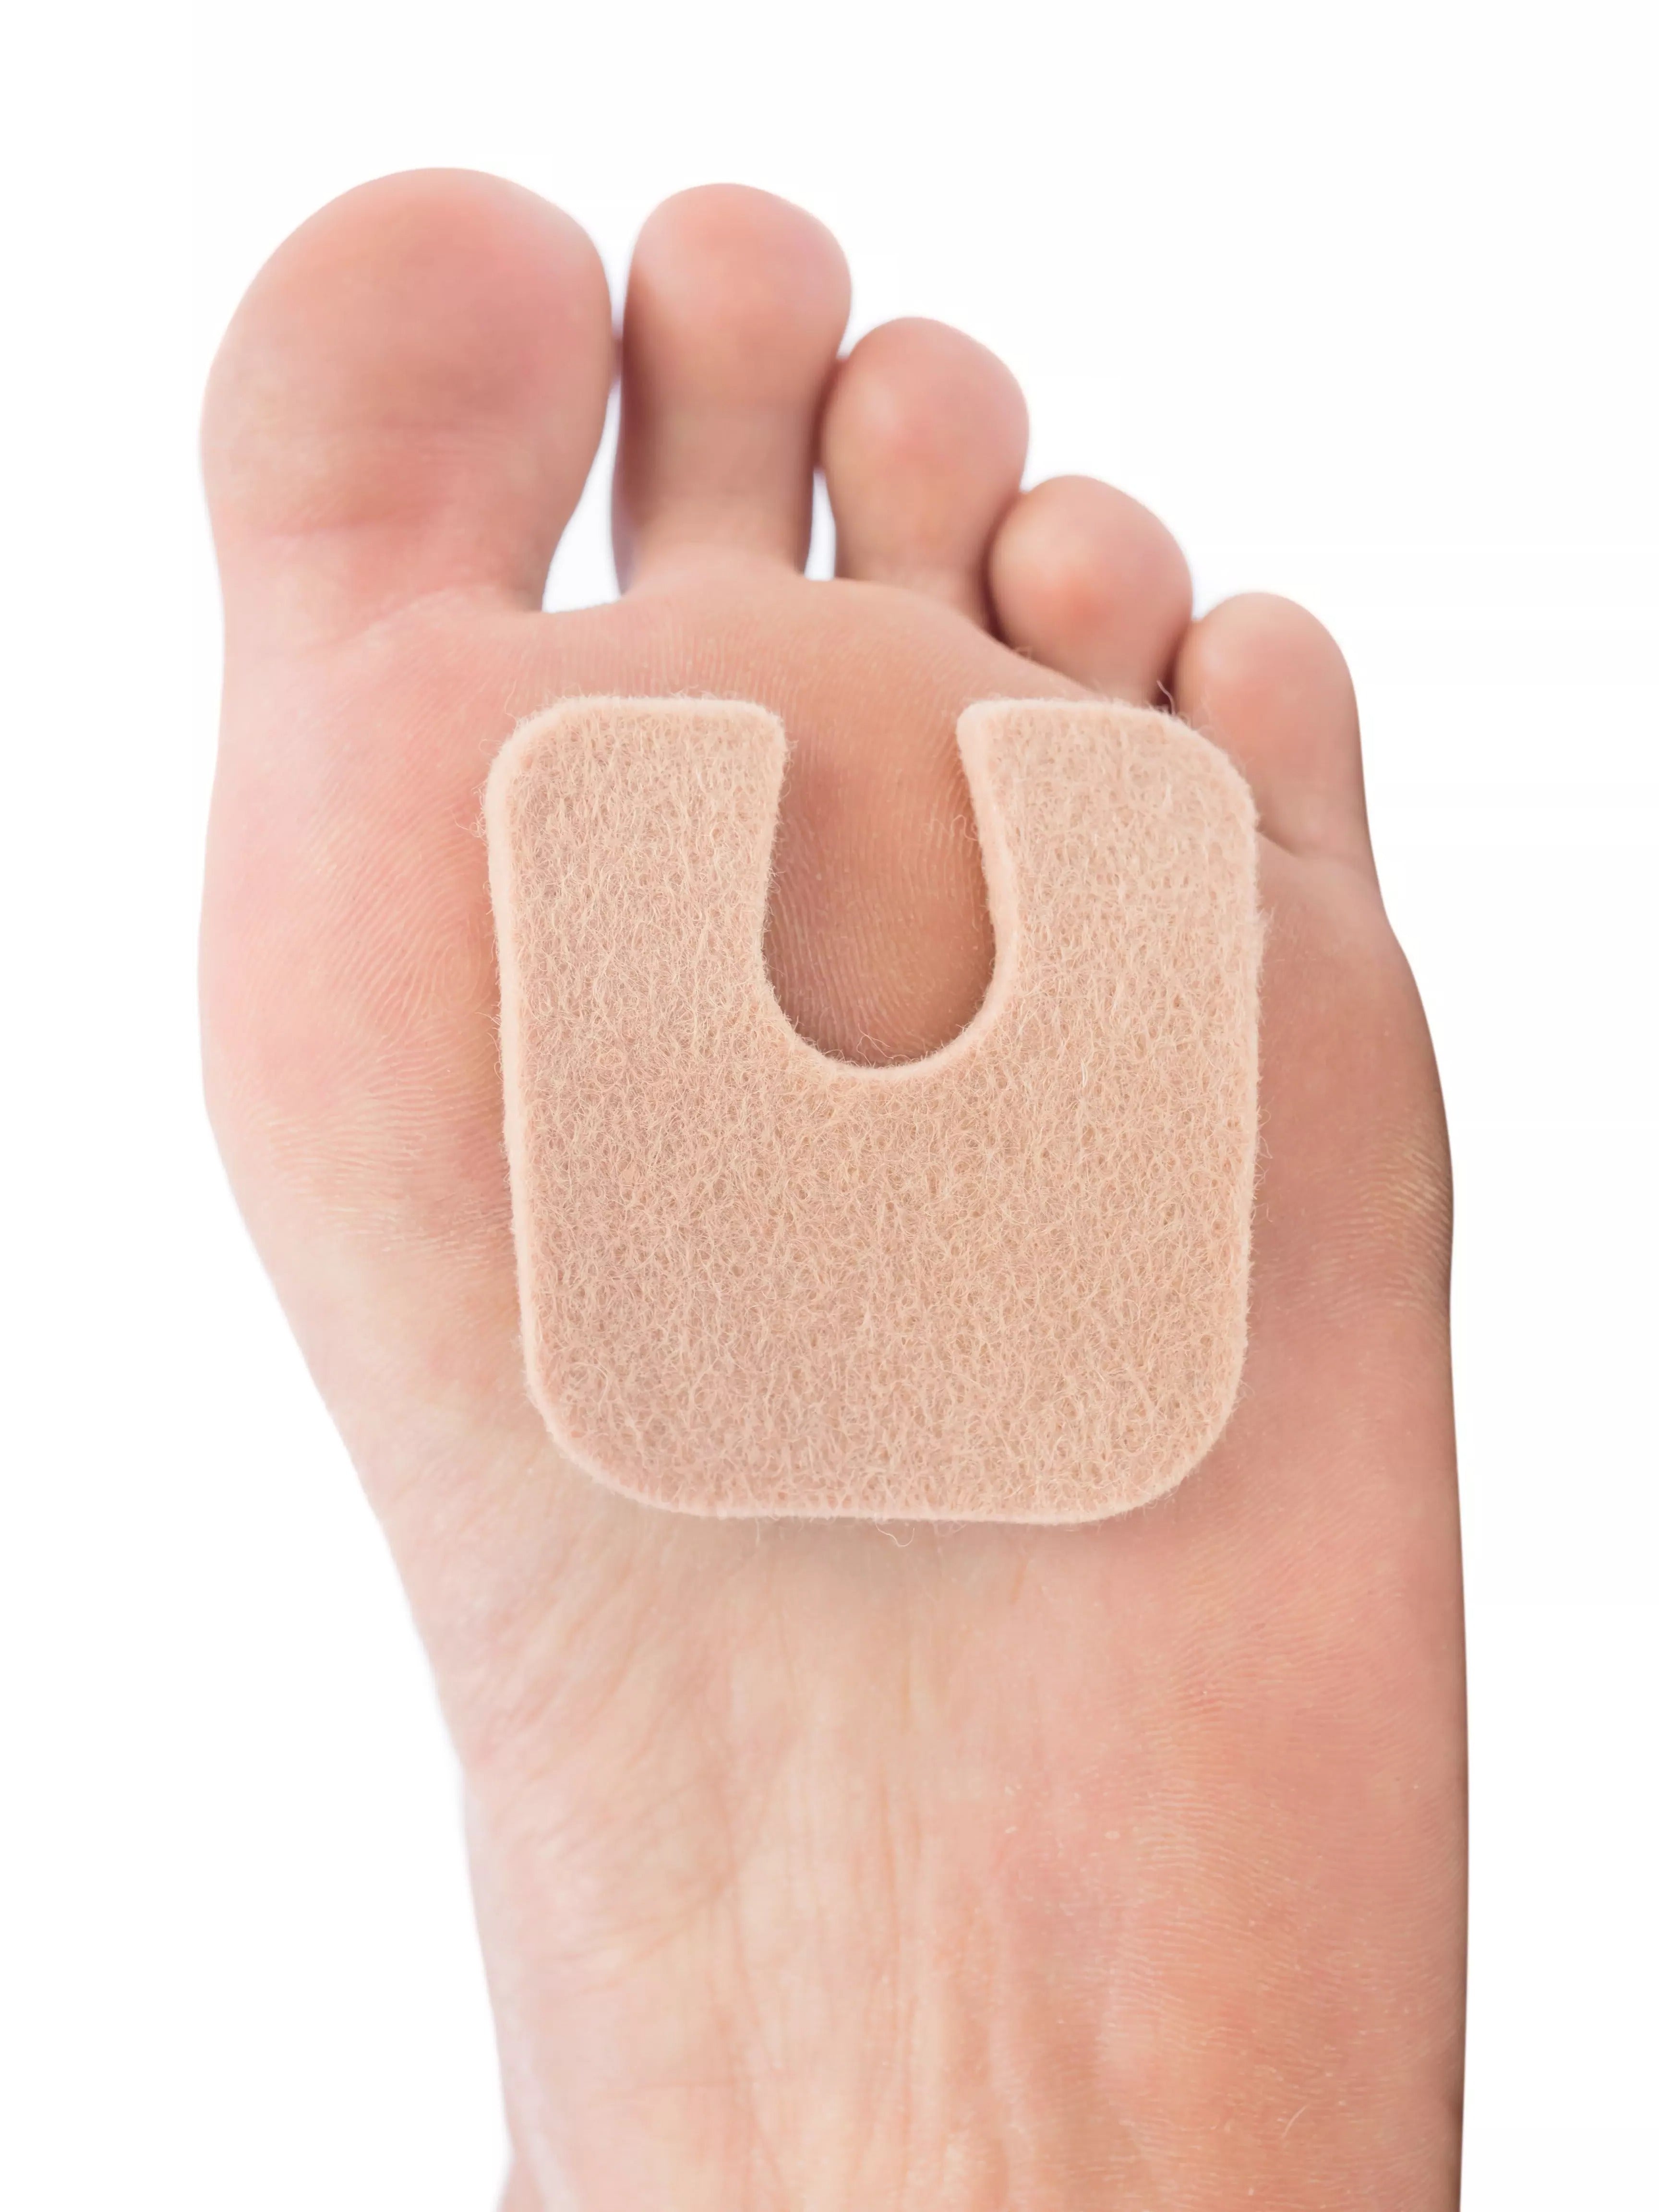 Get this foot file off  asap! Your feet will thank you! #